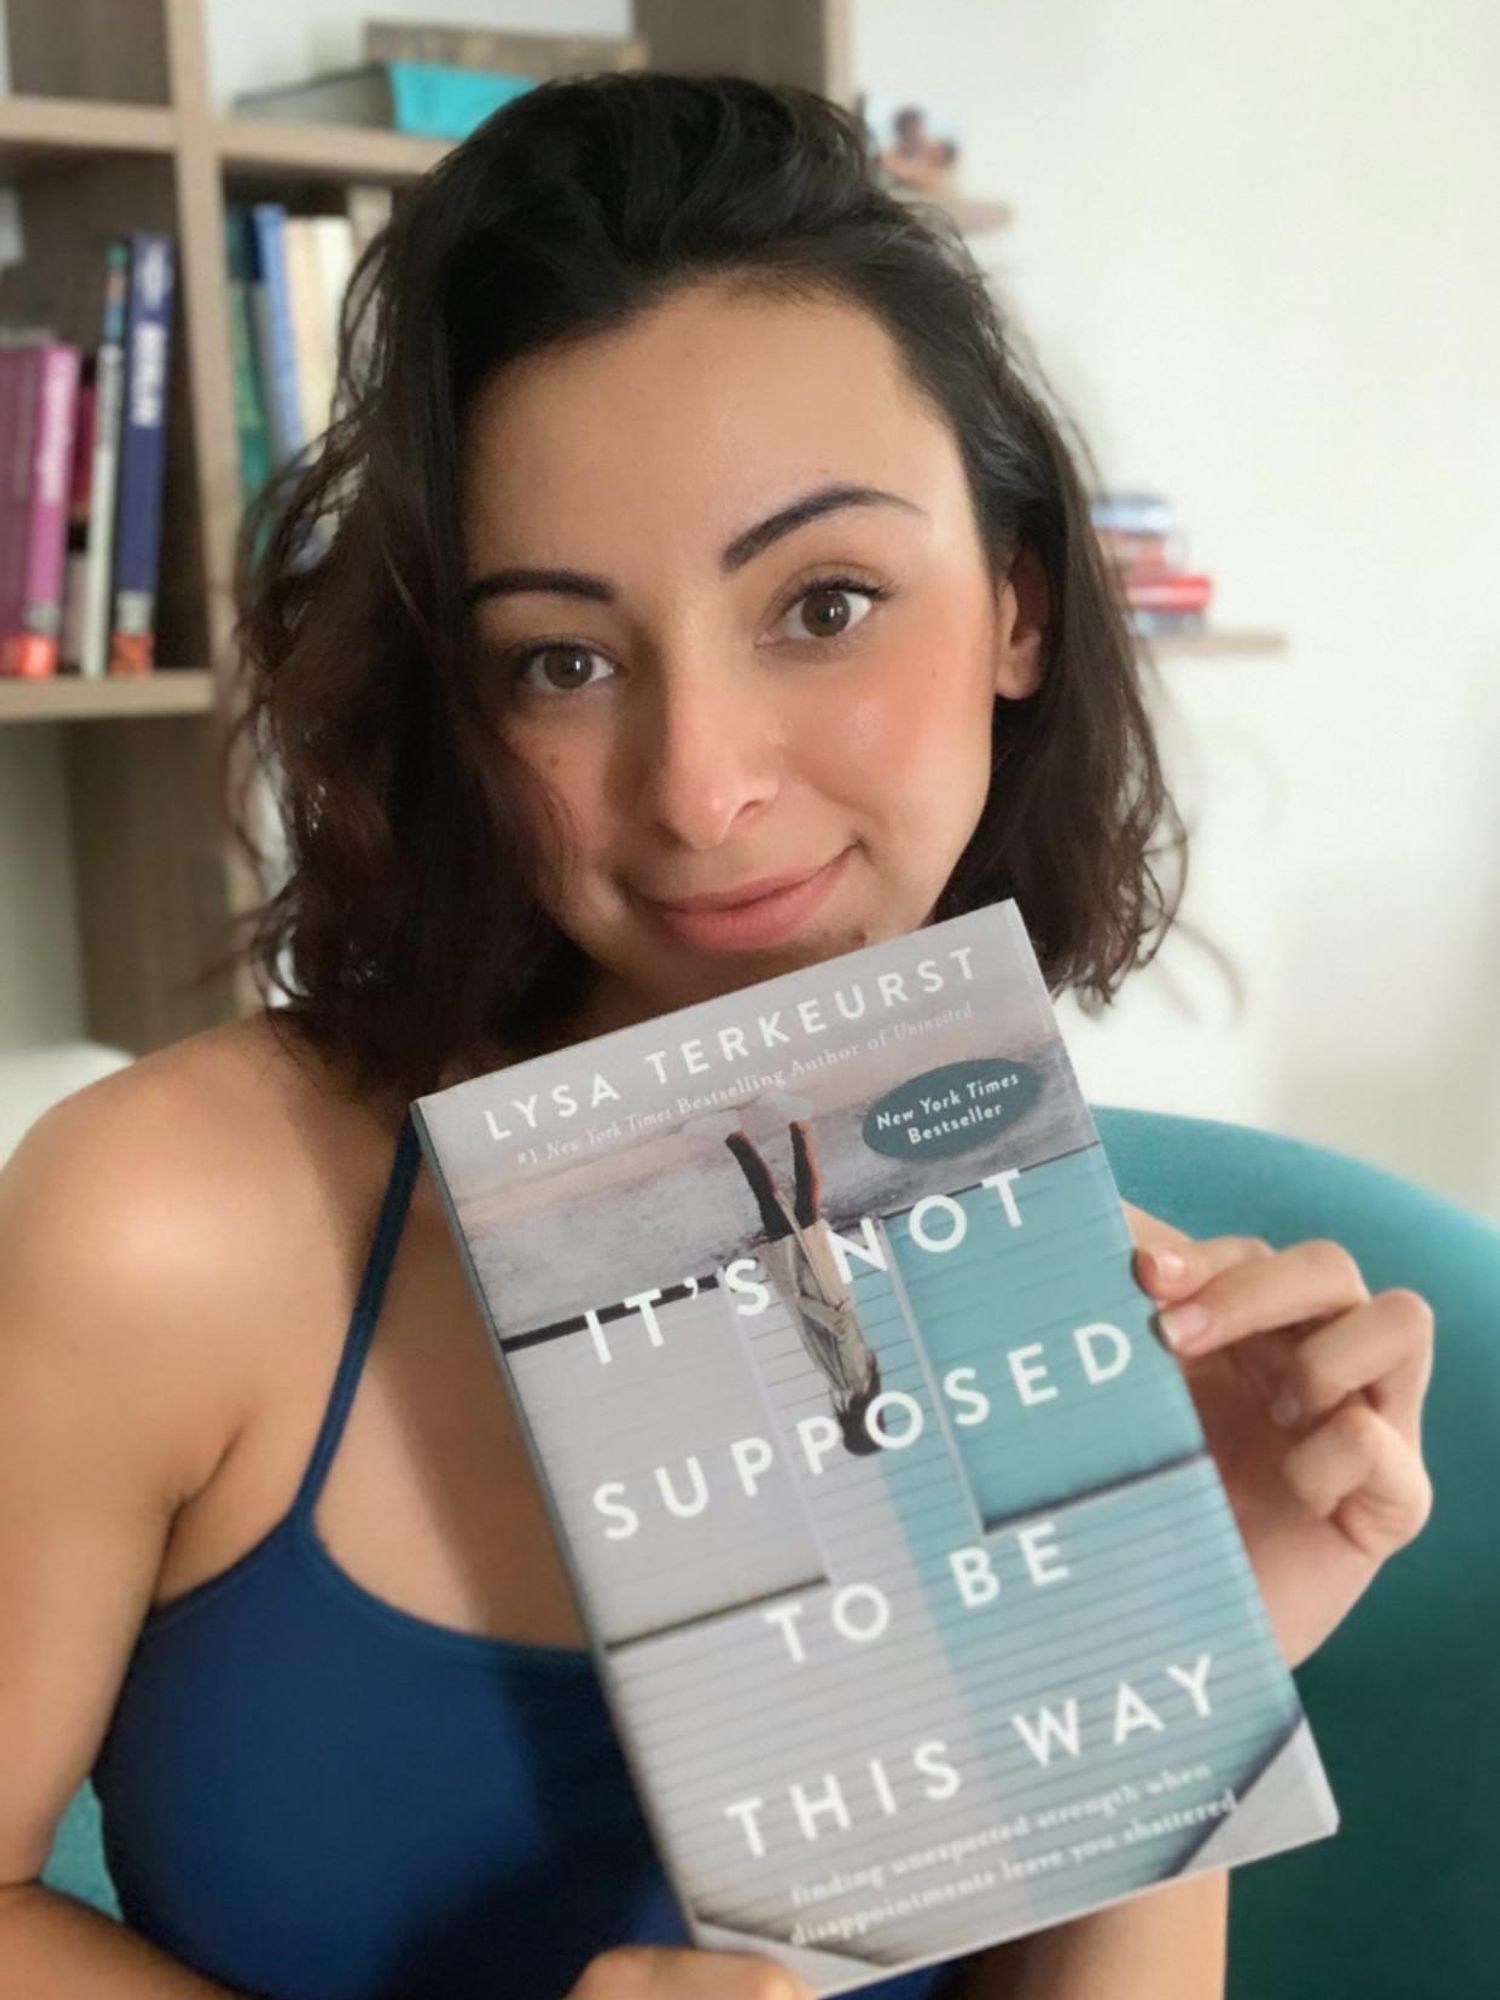 Arja, a woman with short, curly brown hair, poses with a book by Lysa Terkeurst titled, "It's Not Supposed to Be This Way" She wears an blue camisole and poses in front of a bookshelf.